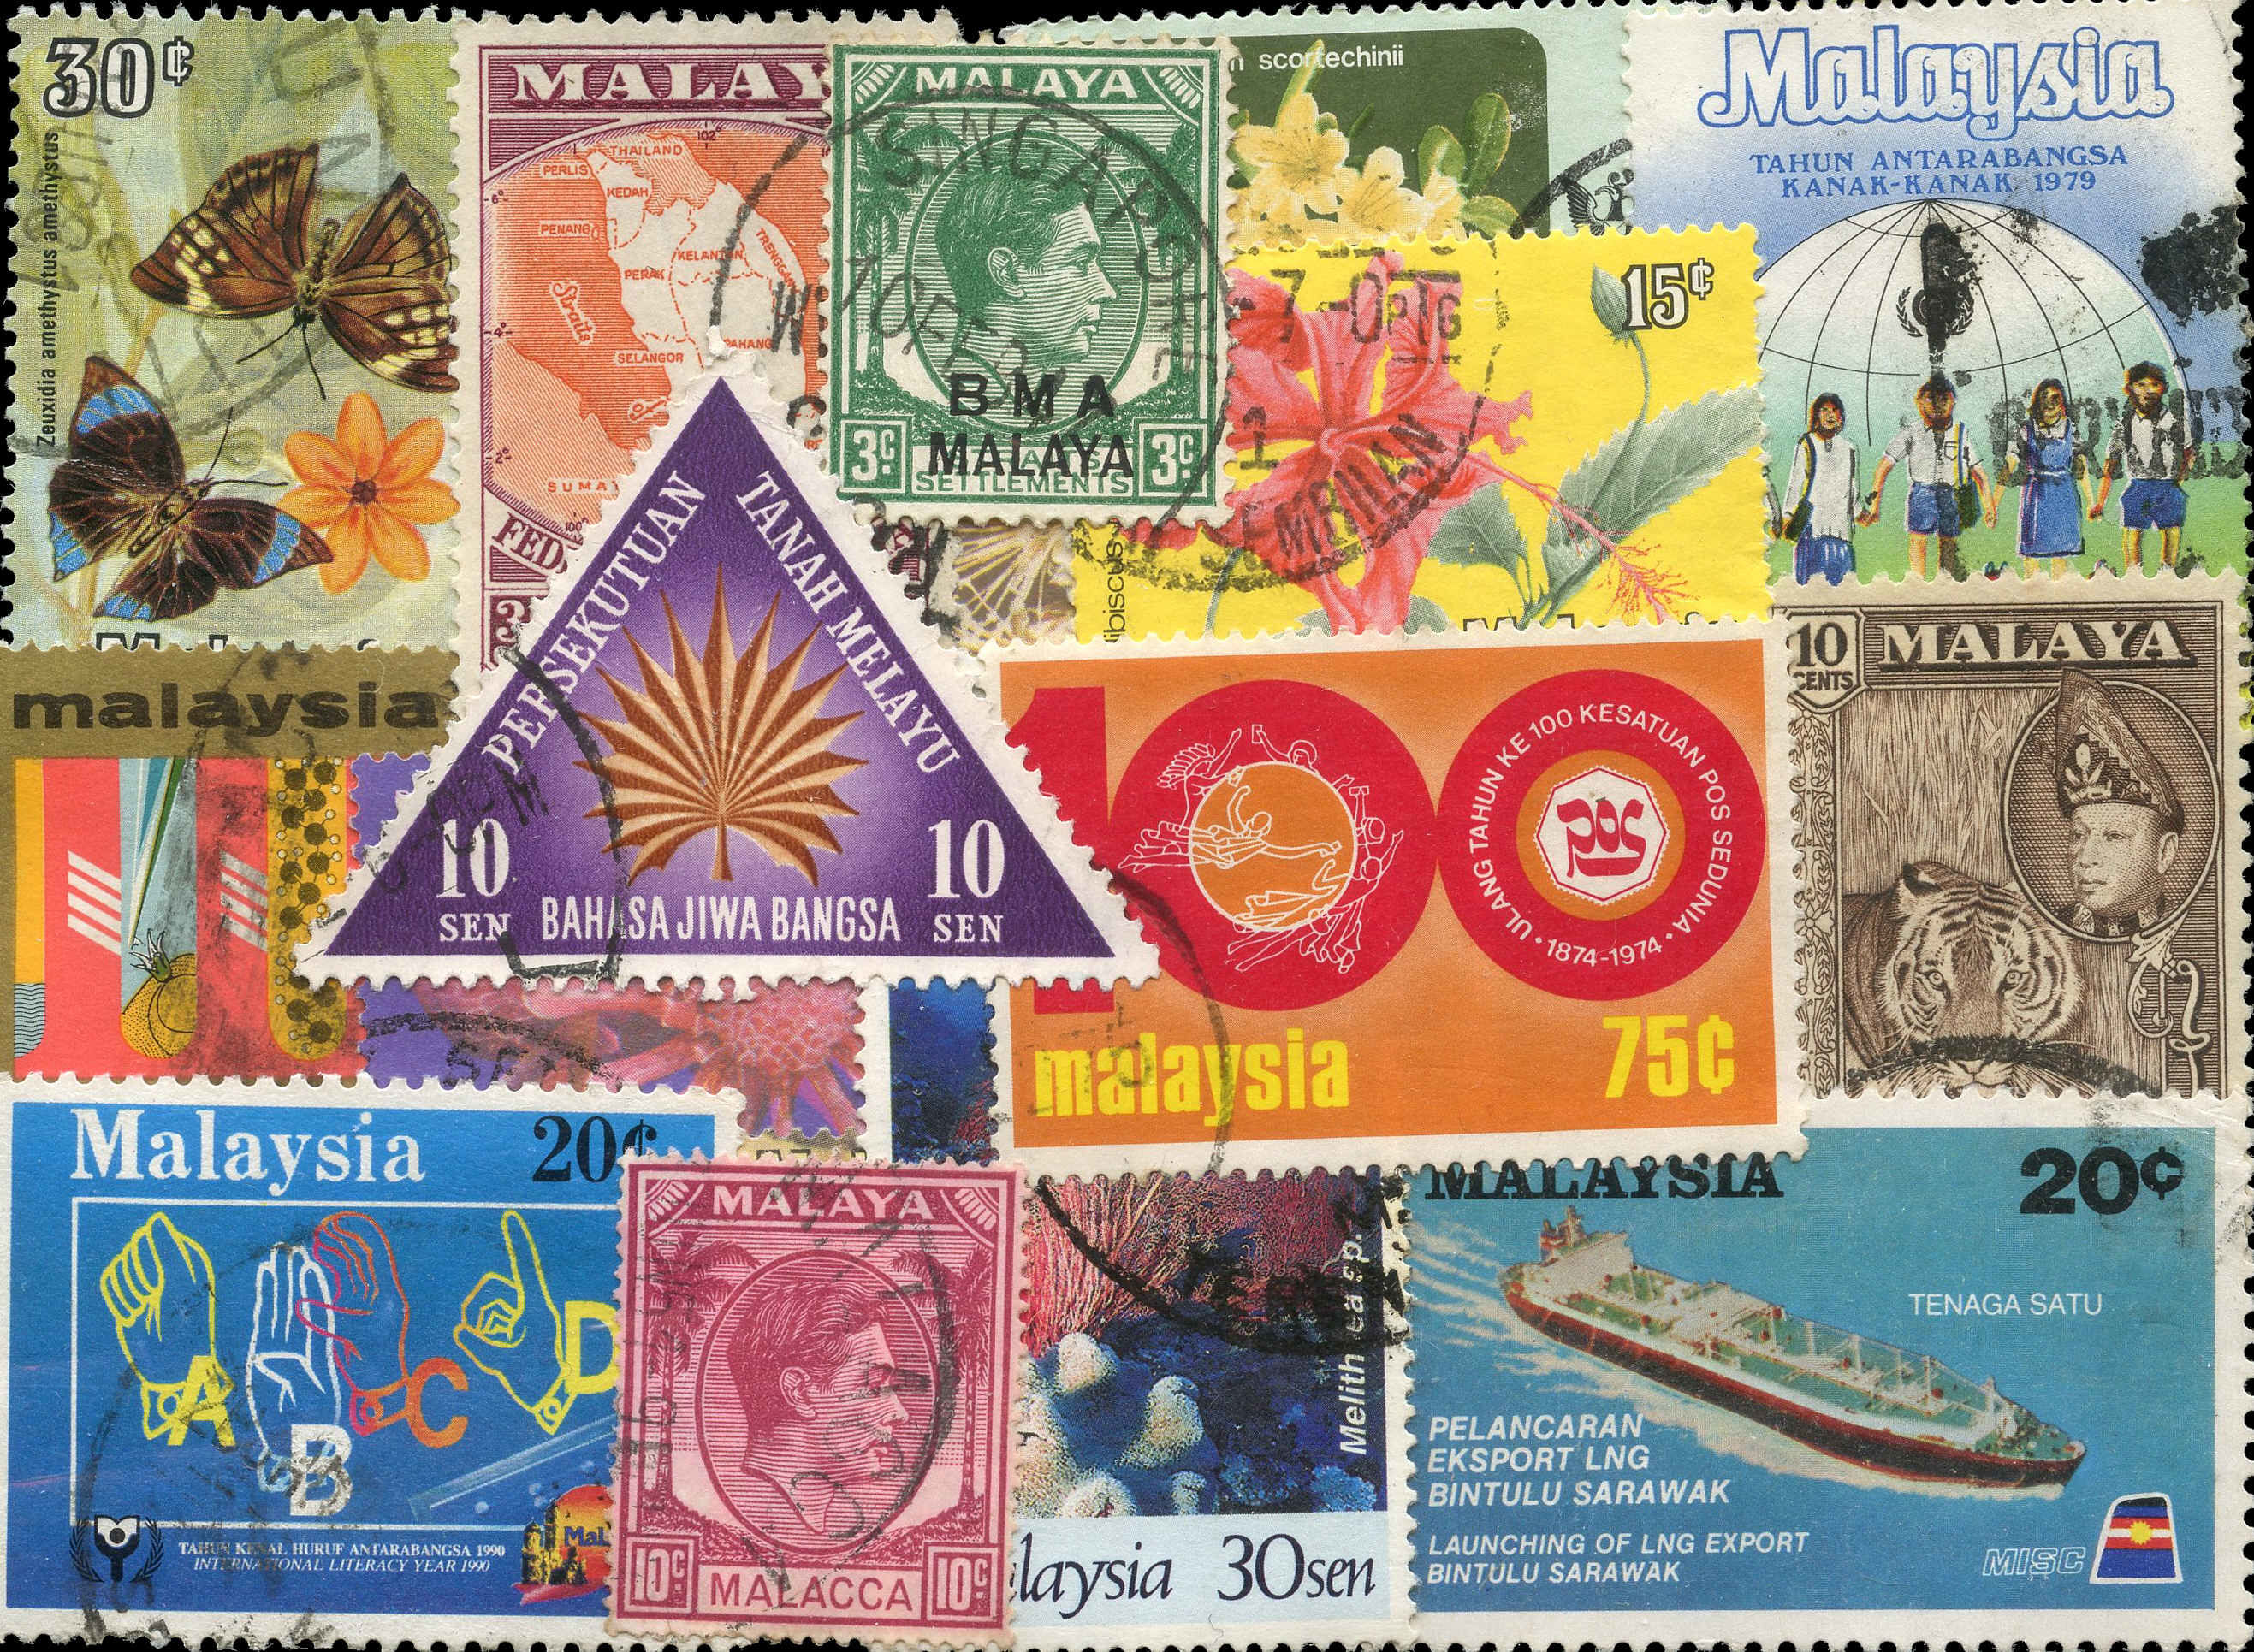 Buy Malaysia - Stamp Packet | Vista Stamps